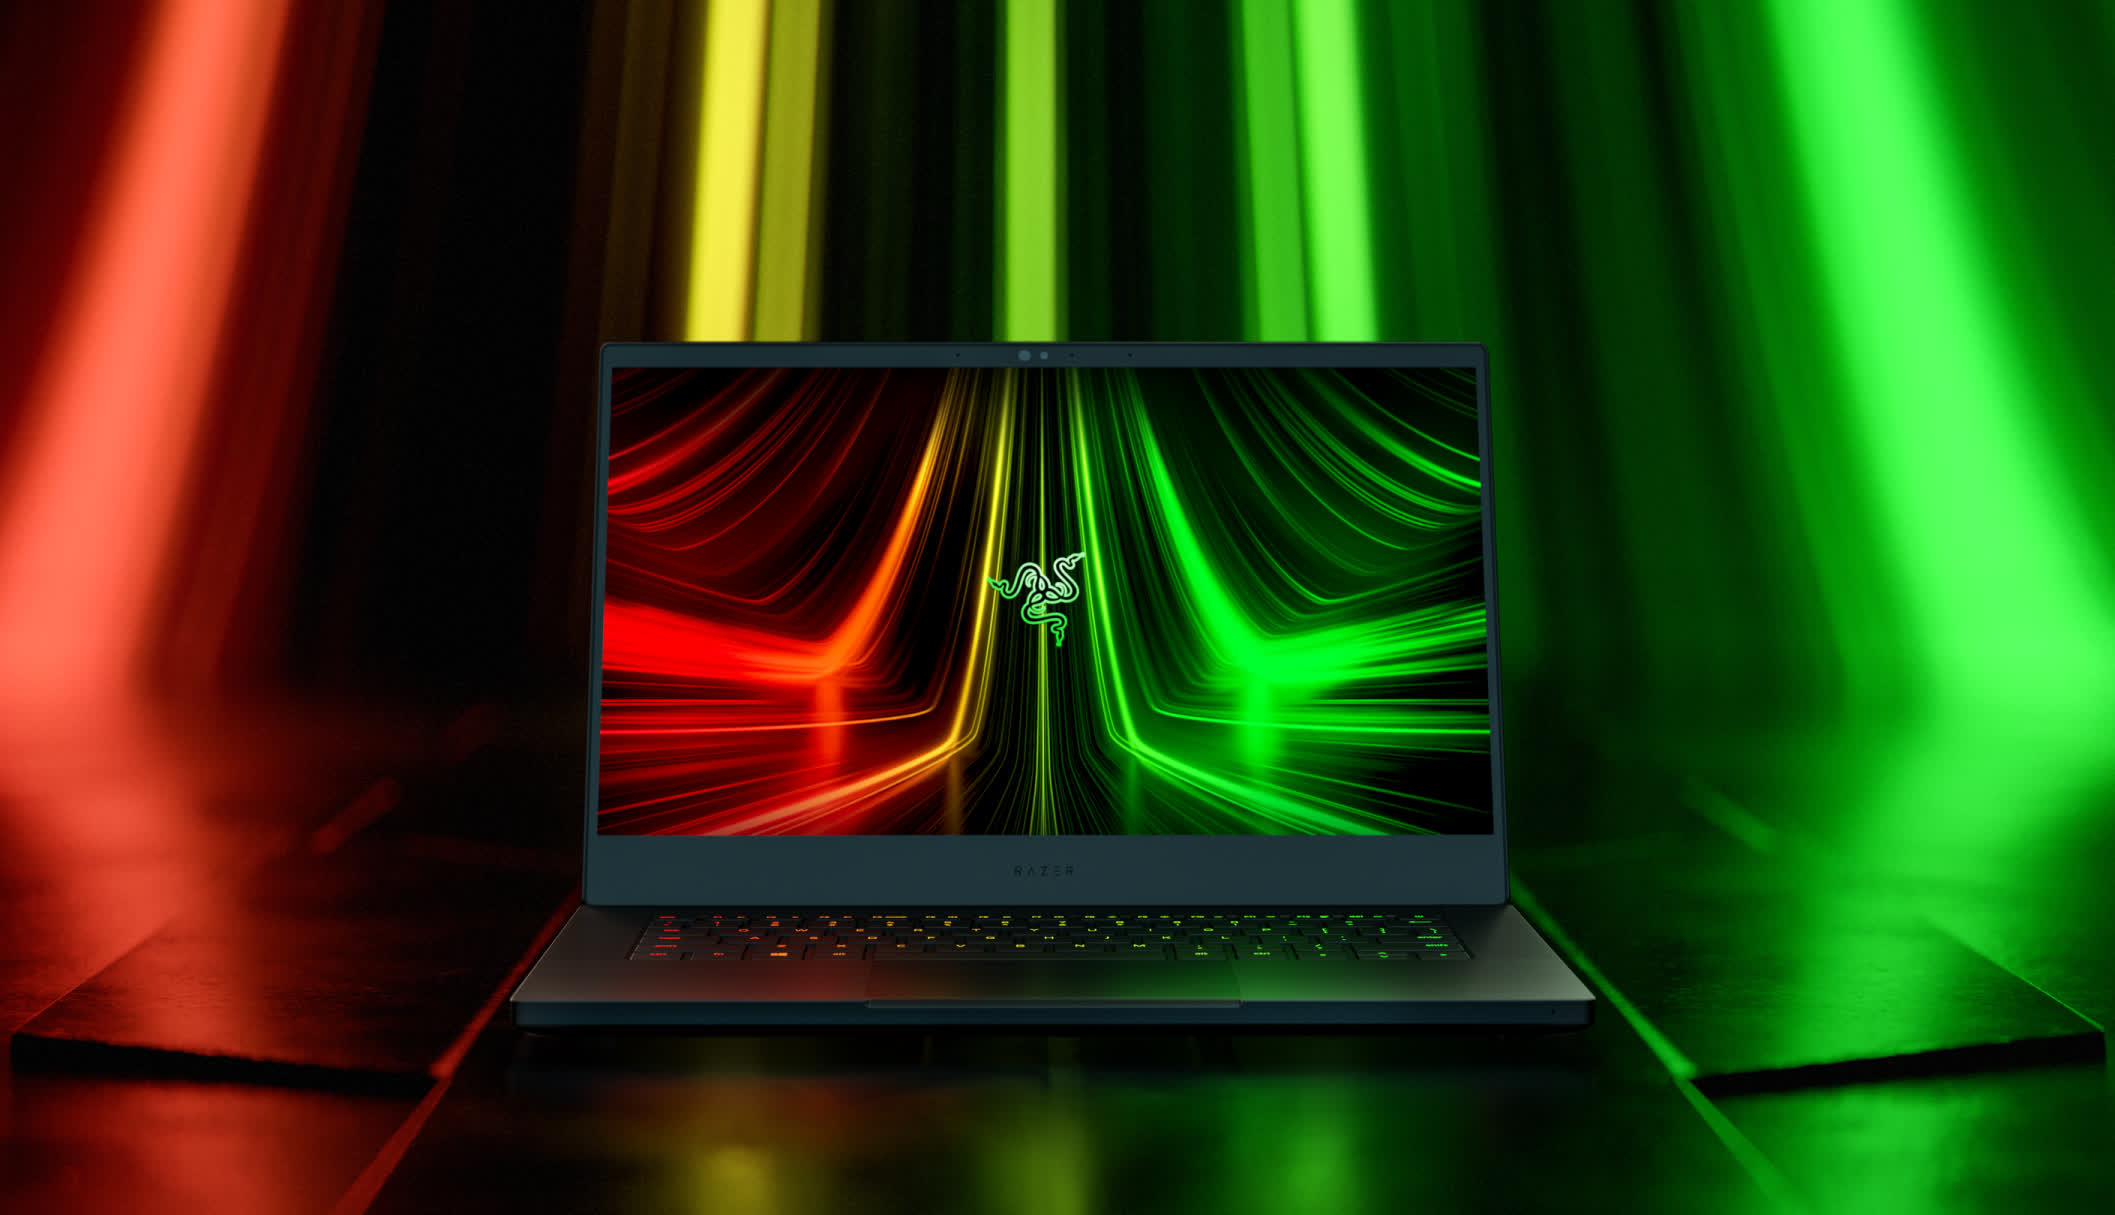 Razer updates Blade laptops with RTX 30 GPUs, new CPUs, and DDR5 